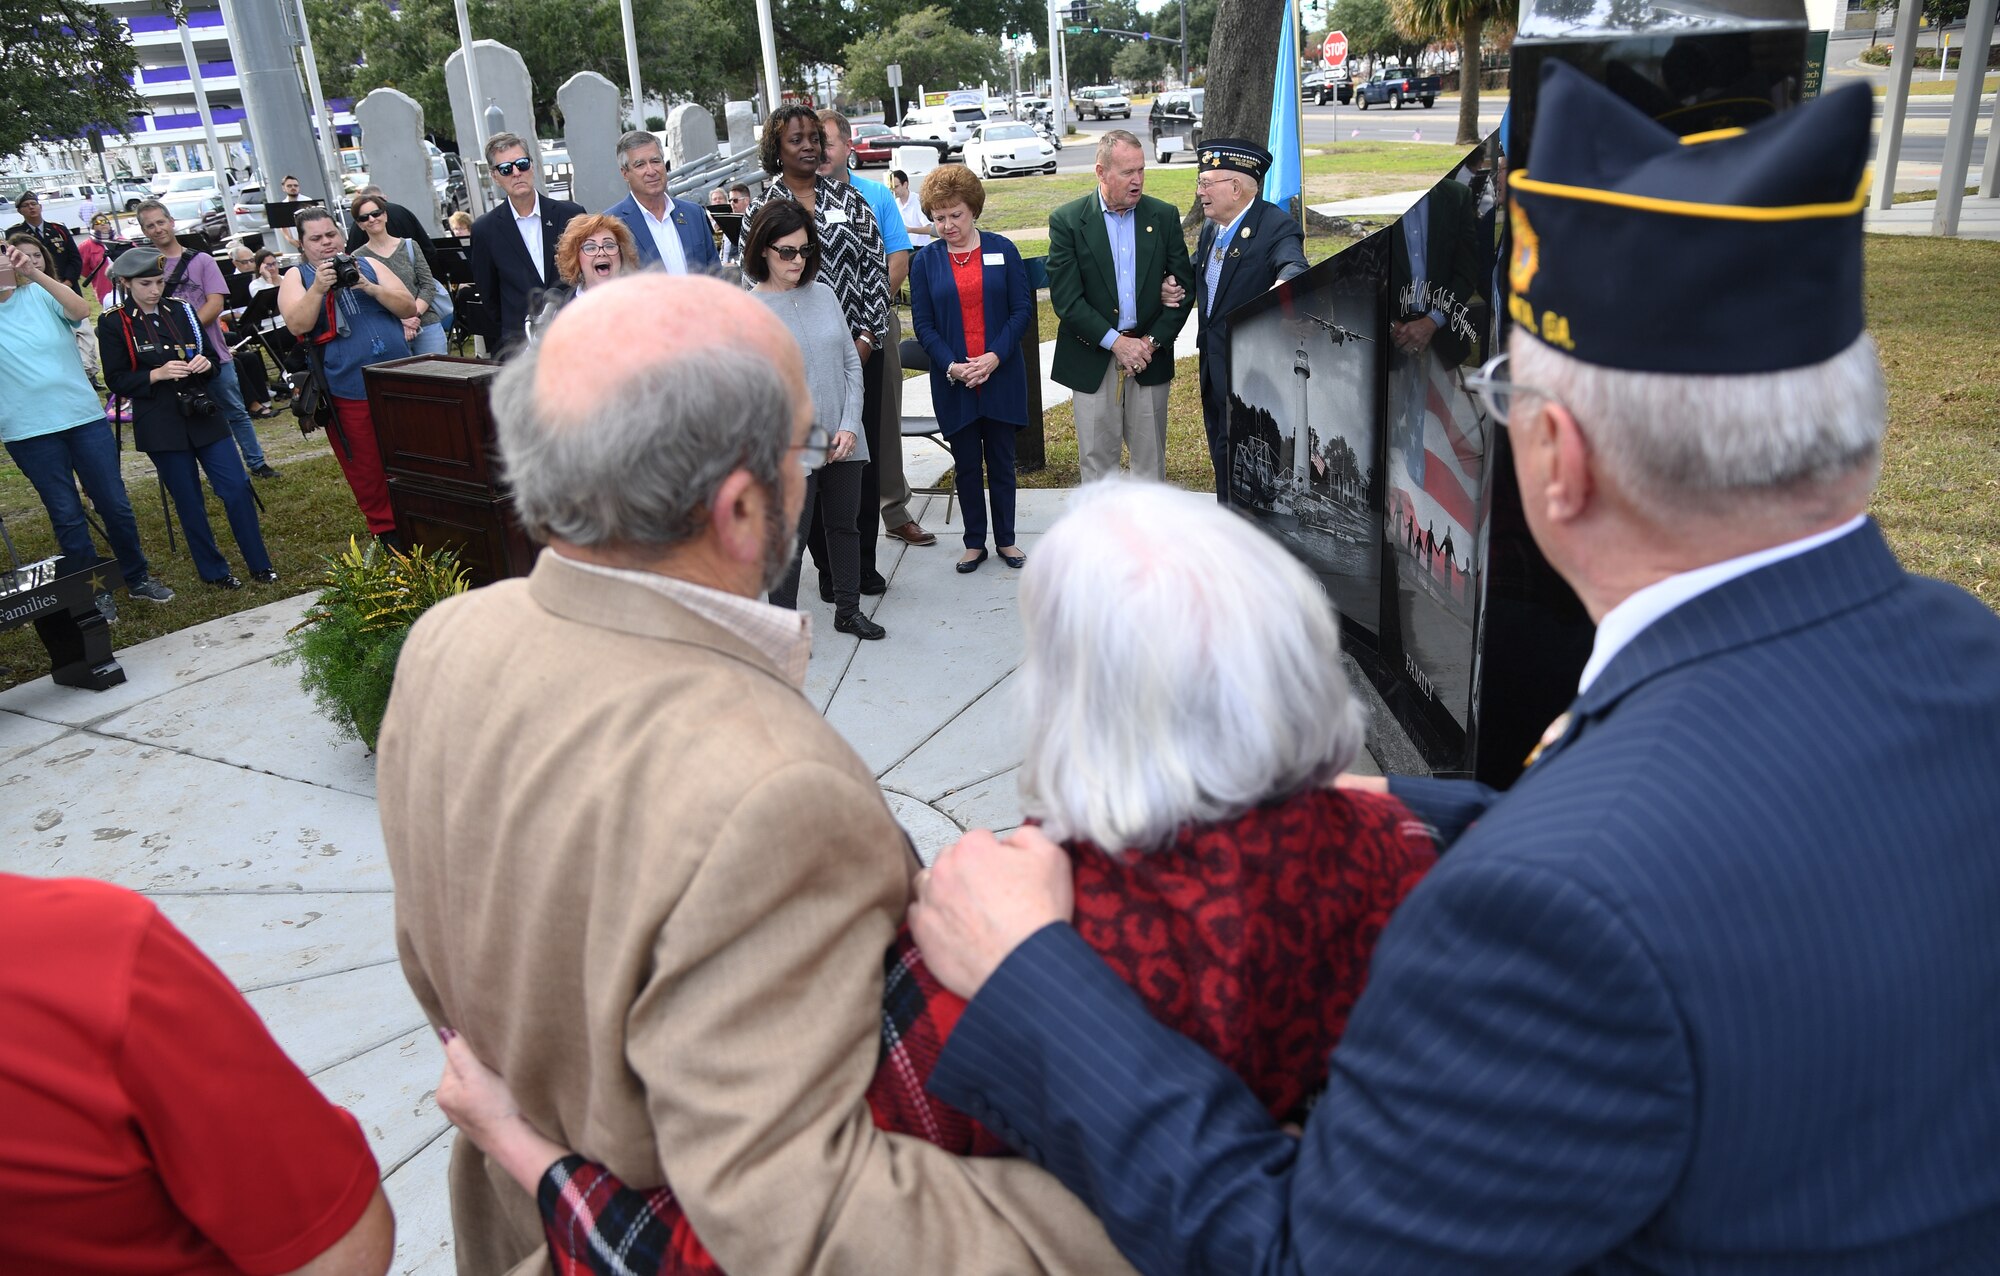 Gold Star family members, local community members and Keesler Airmen attend the Gold Star Families Memorial Monument dedication ceremony at Guice Veterans Memorial Park in Biloxi, Mississippi, Nov. 23, 2019. The monument honors families of service men and women who sacrificed their lives while serving in the military. (U.S. Air Force photo by Kemberly Groue)